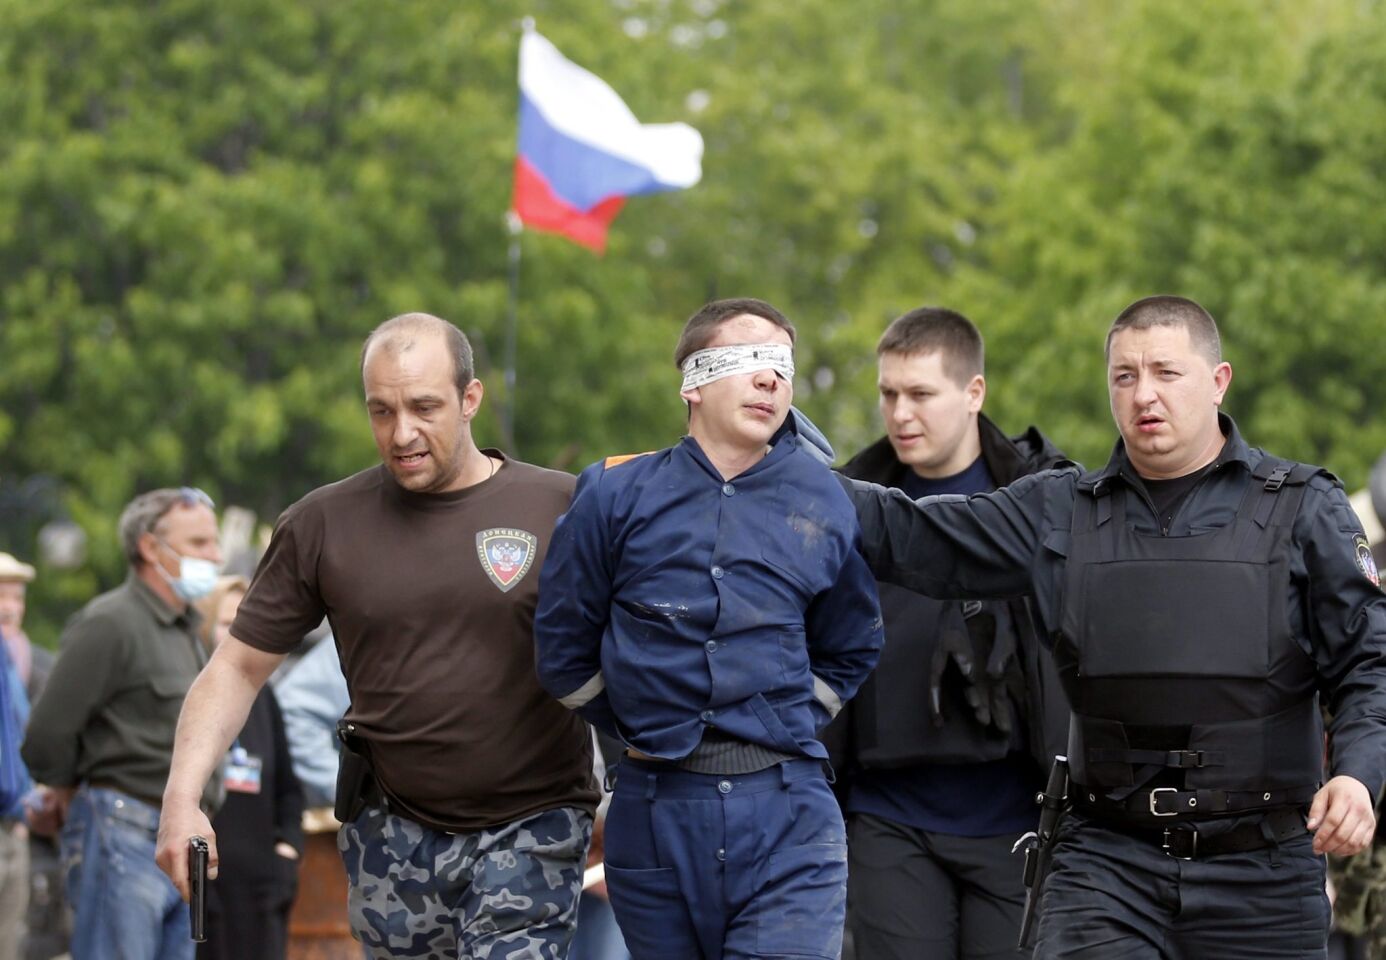 Pro-Russian supporters lead an unidentified man in front of the occupied regional administration building in Donetsk, Ukraine. Pro-Russian separatists said that up to 20 of their fighters may have been killed in clashes with government troops in the eastern Ukrainian city of Slaviansk.